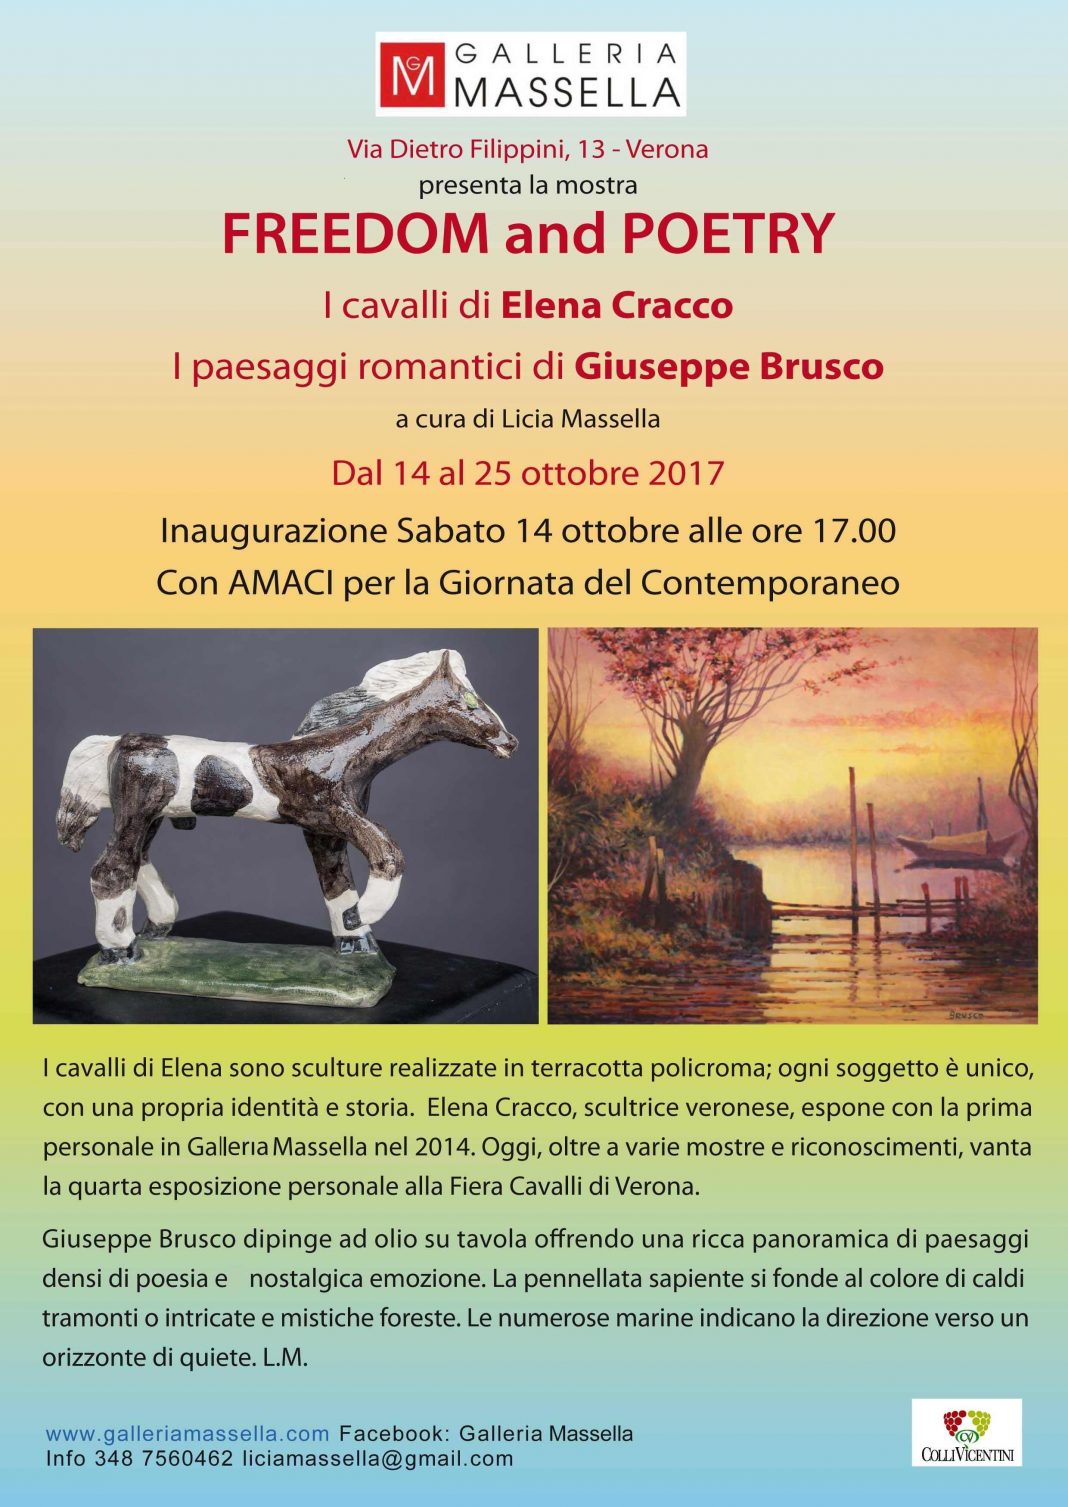 Freedom and poetryhttps://www.exibart.com/repository/media/eventi/2017/10/freedom-and-poetry-1068x1507.jpg